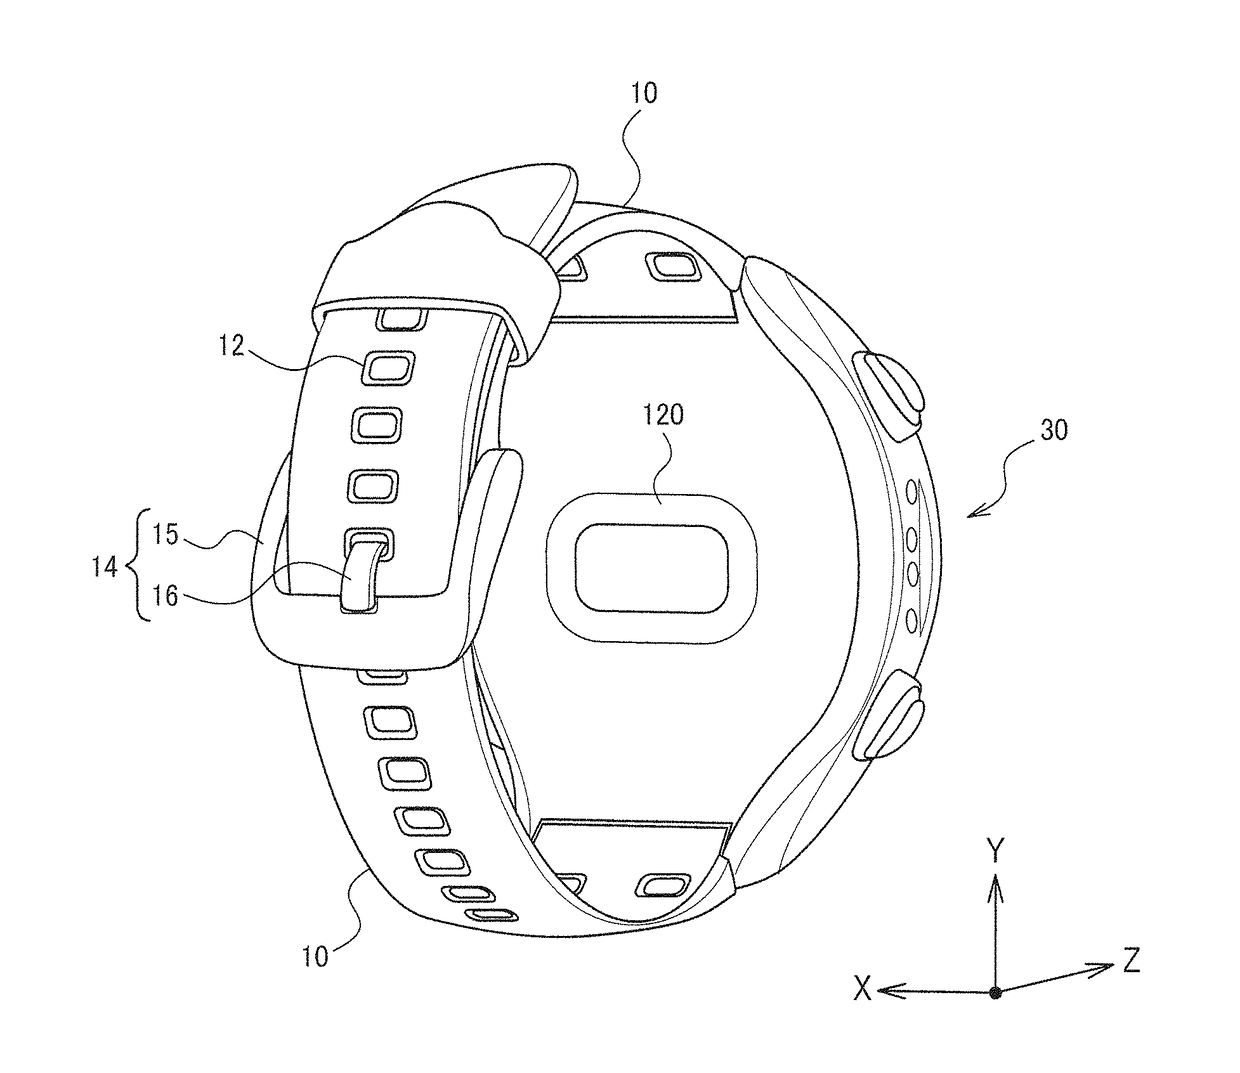 Wearable device, method for generating notification information, and system